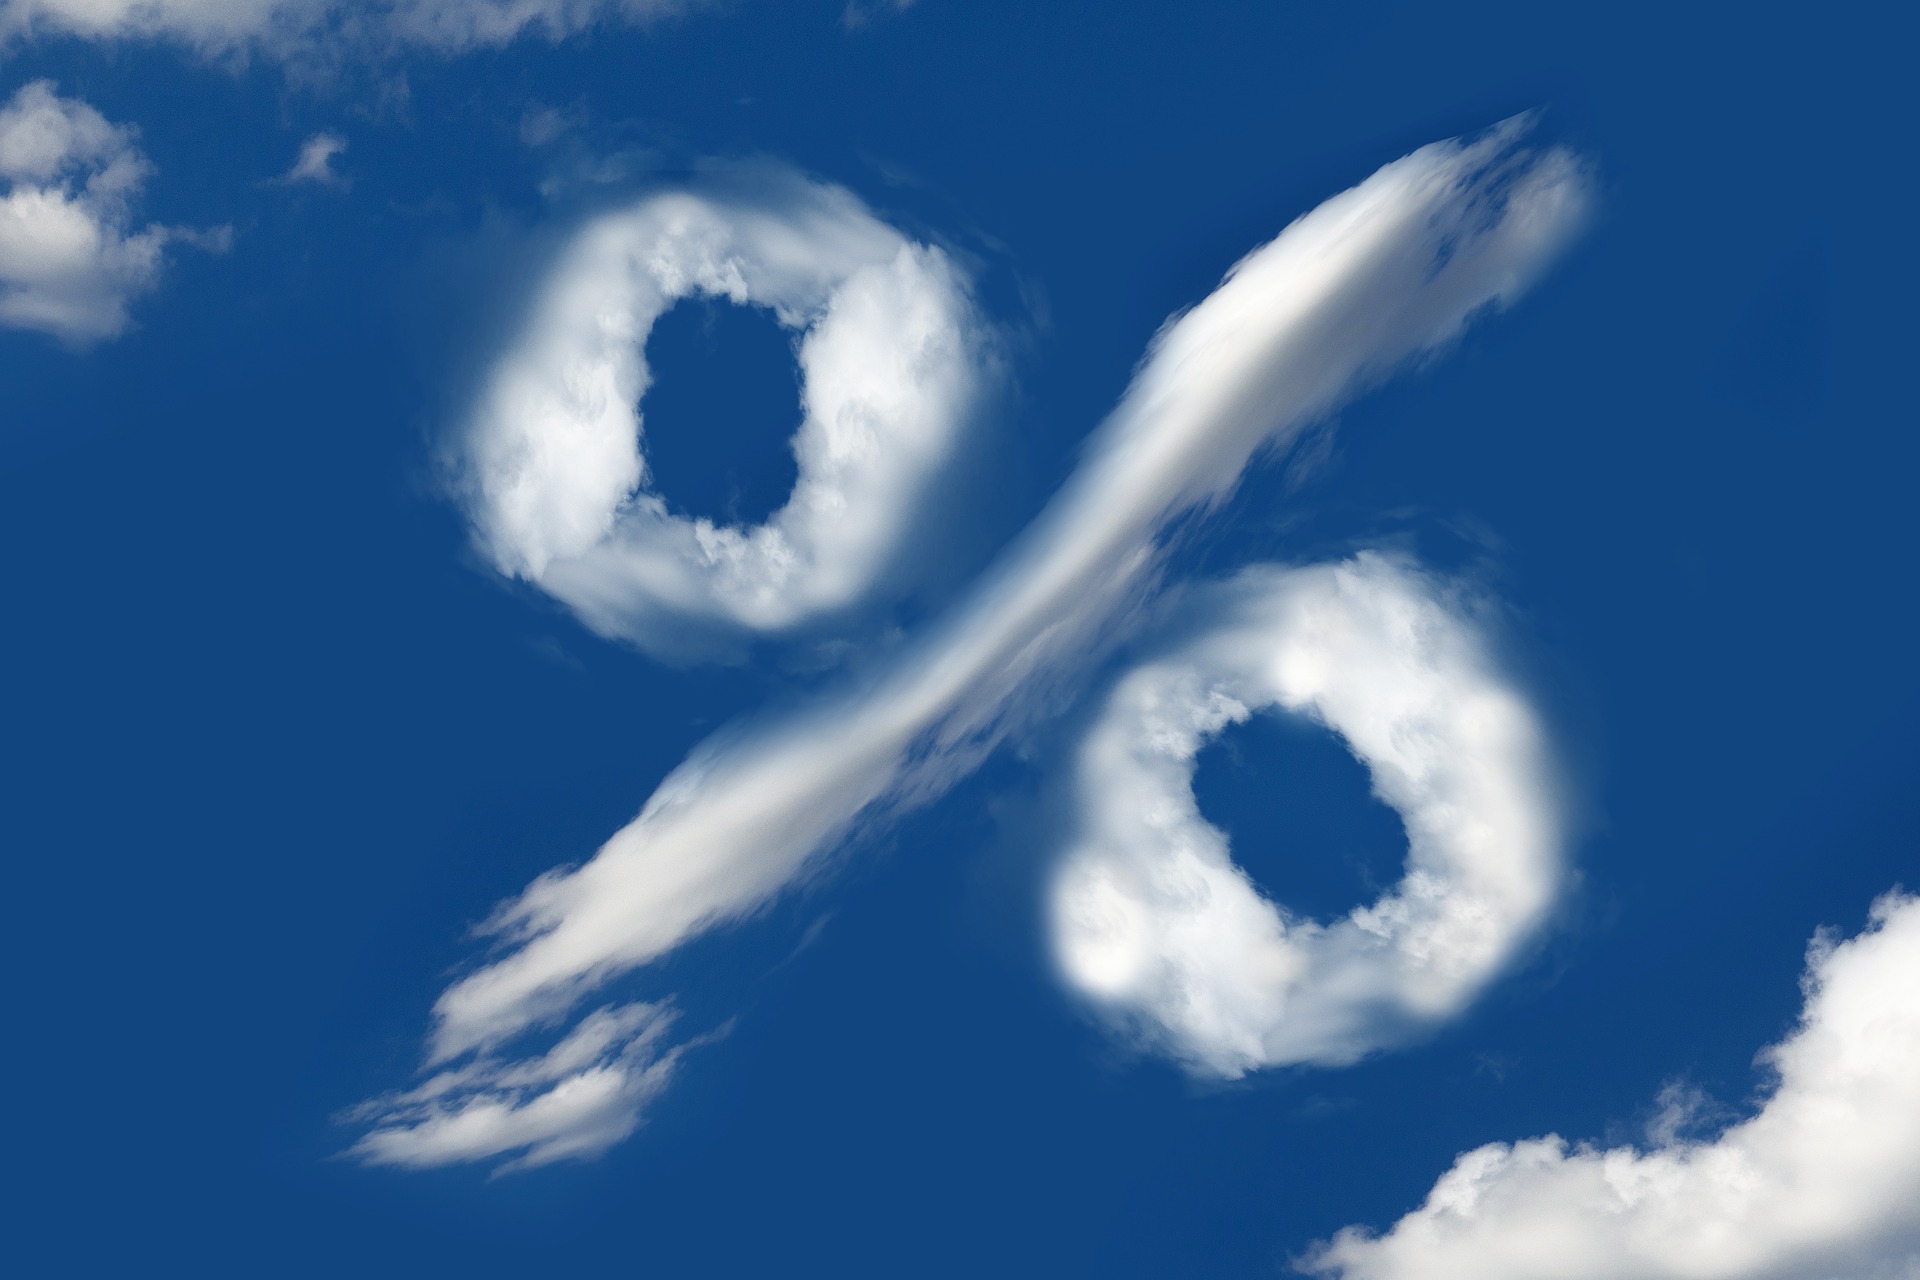 abstract image of clouds shaped like a percentage sign